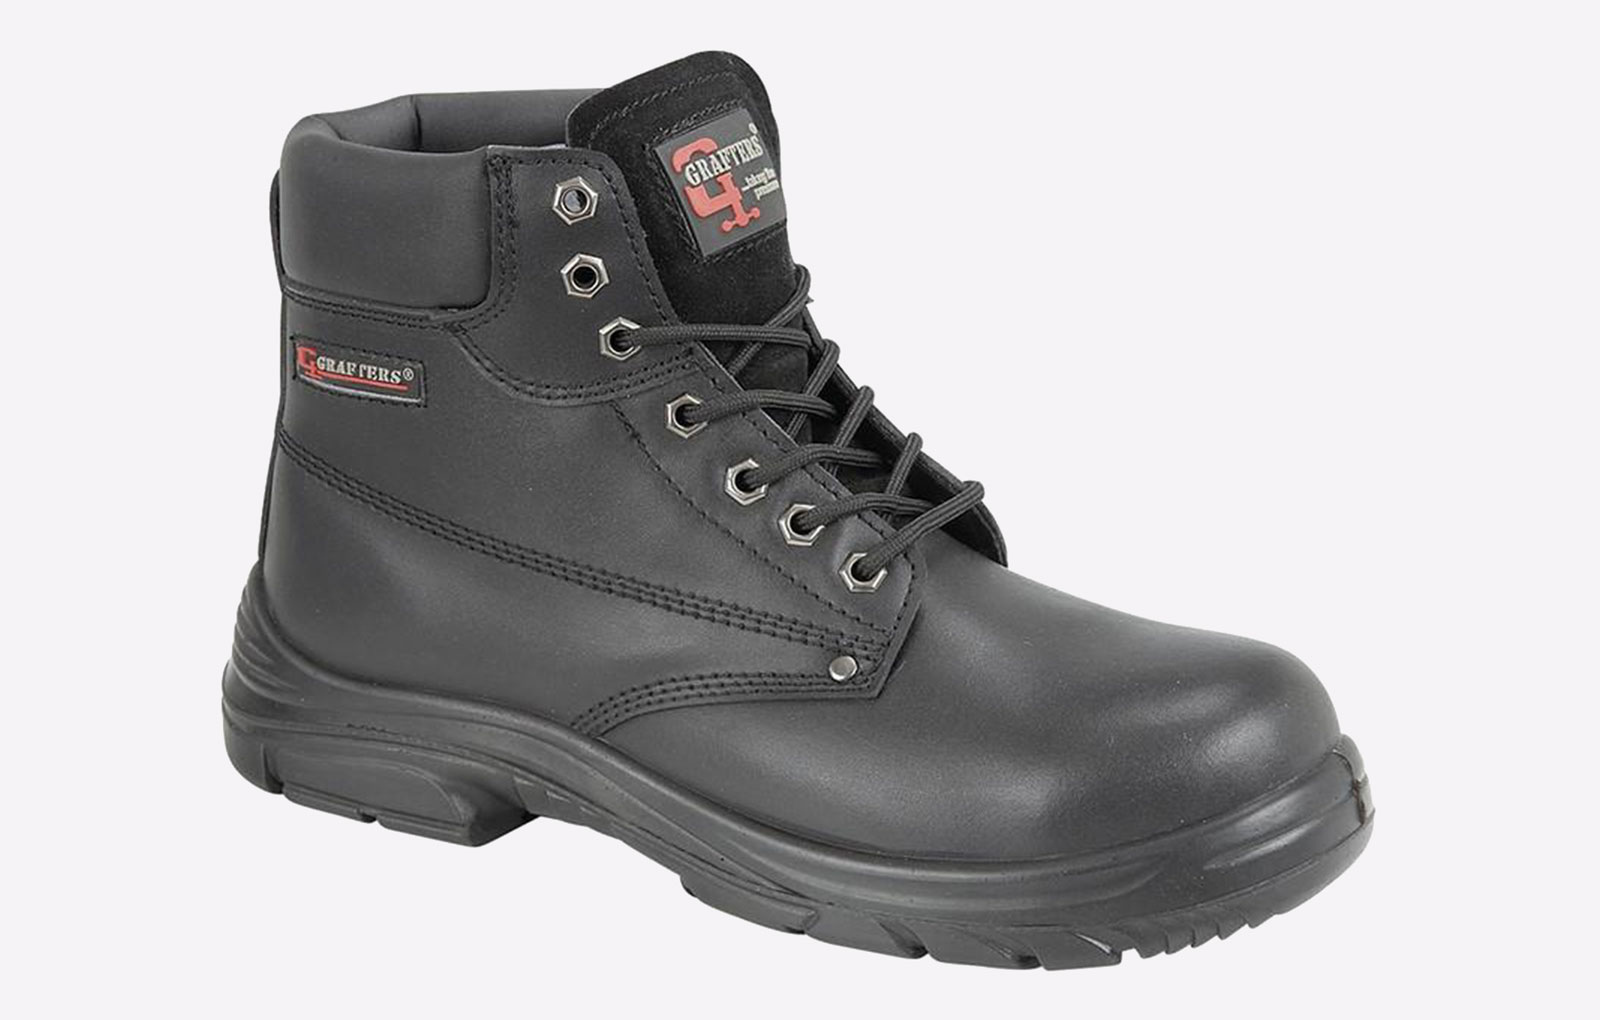 Grafters Compton Safety Boots Mens (Extra Wide Fit) - GBD-1403